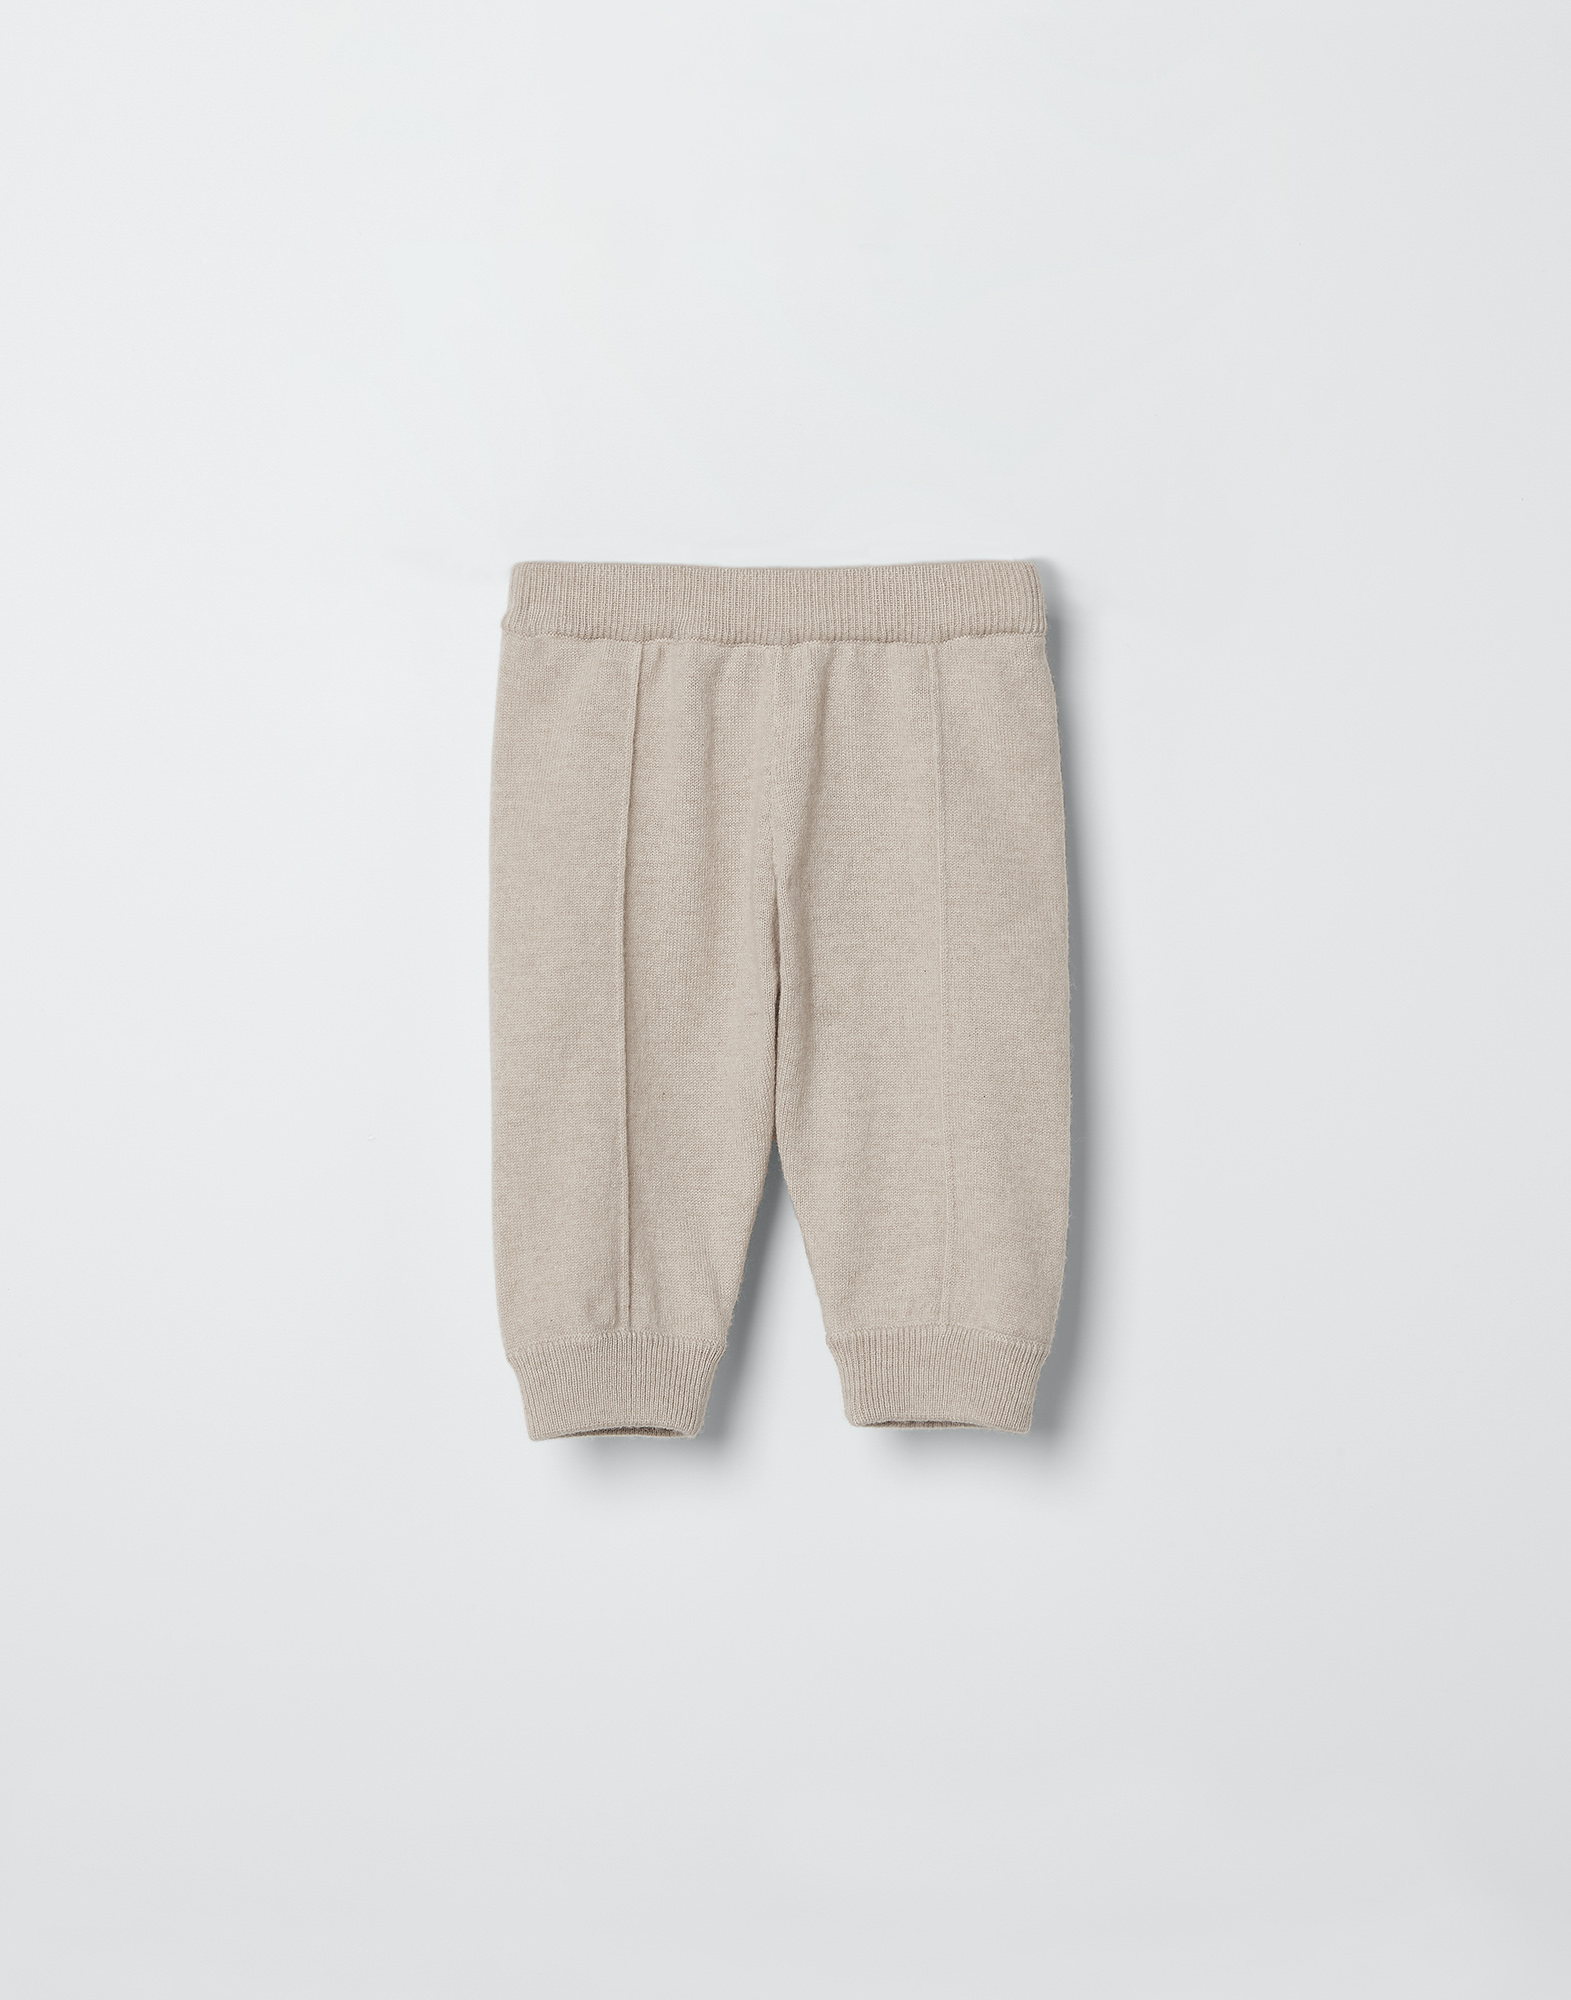 Cashmere knit baby trousers Sand Baby - Brunello Cucinelli